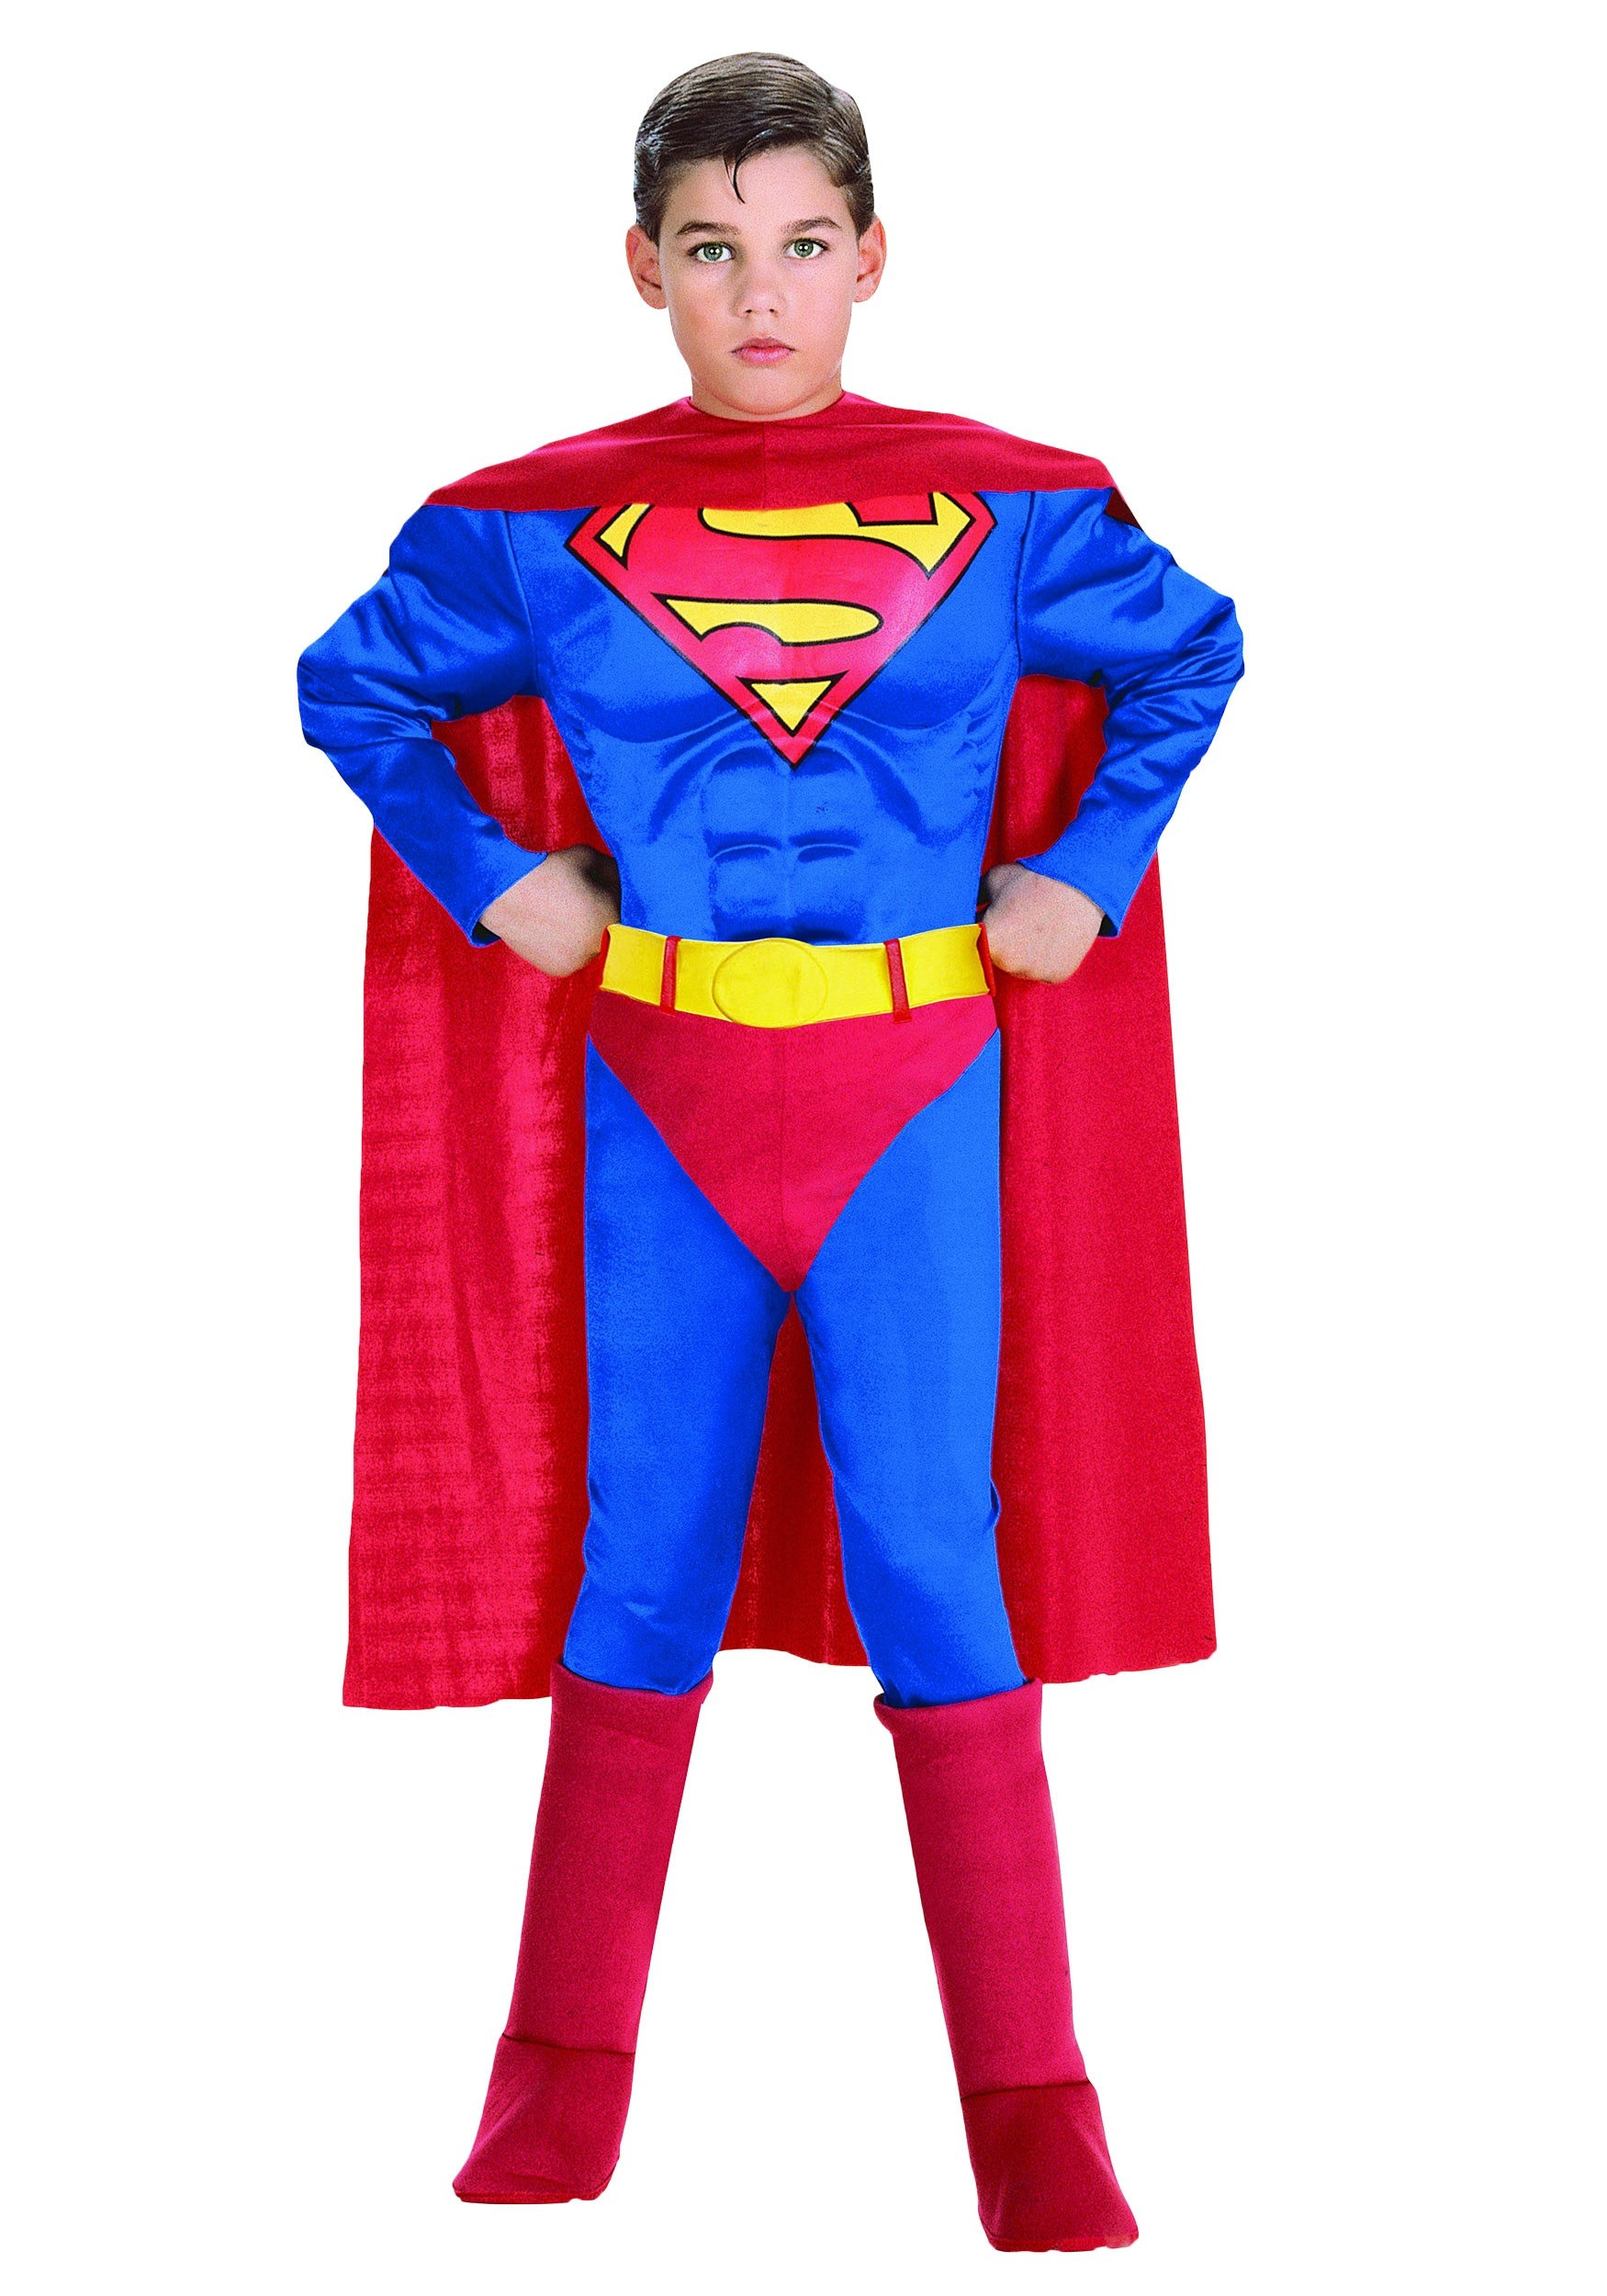 DIY Costumes For Toddlers
 Toddler Deluxe Superman Costume